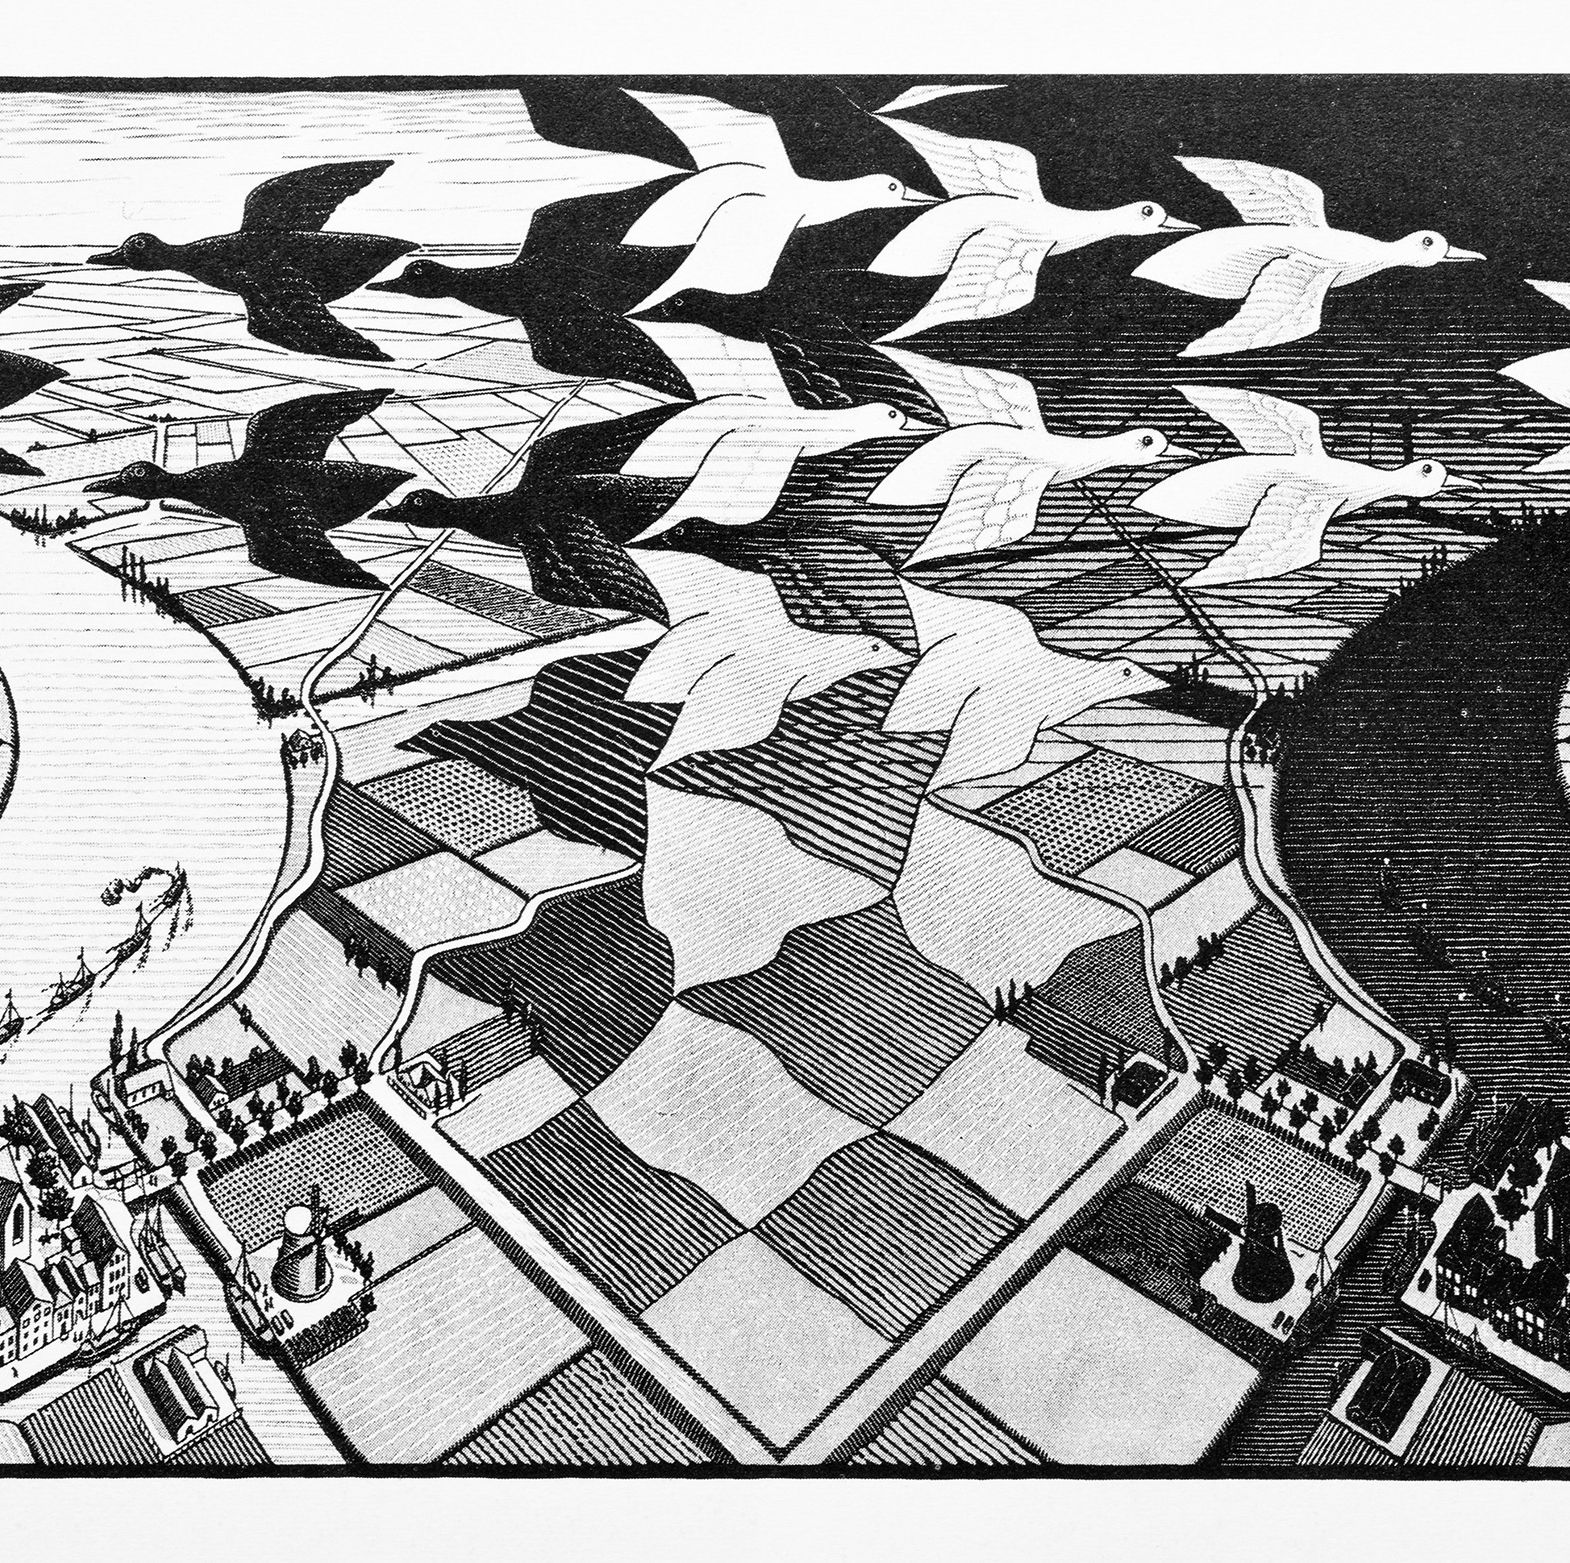 How M.C. Escher Created His Famous Geometric Artwork Without Any Formal Math Training